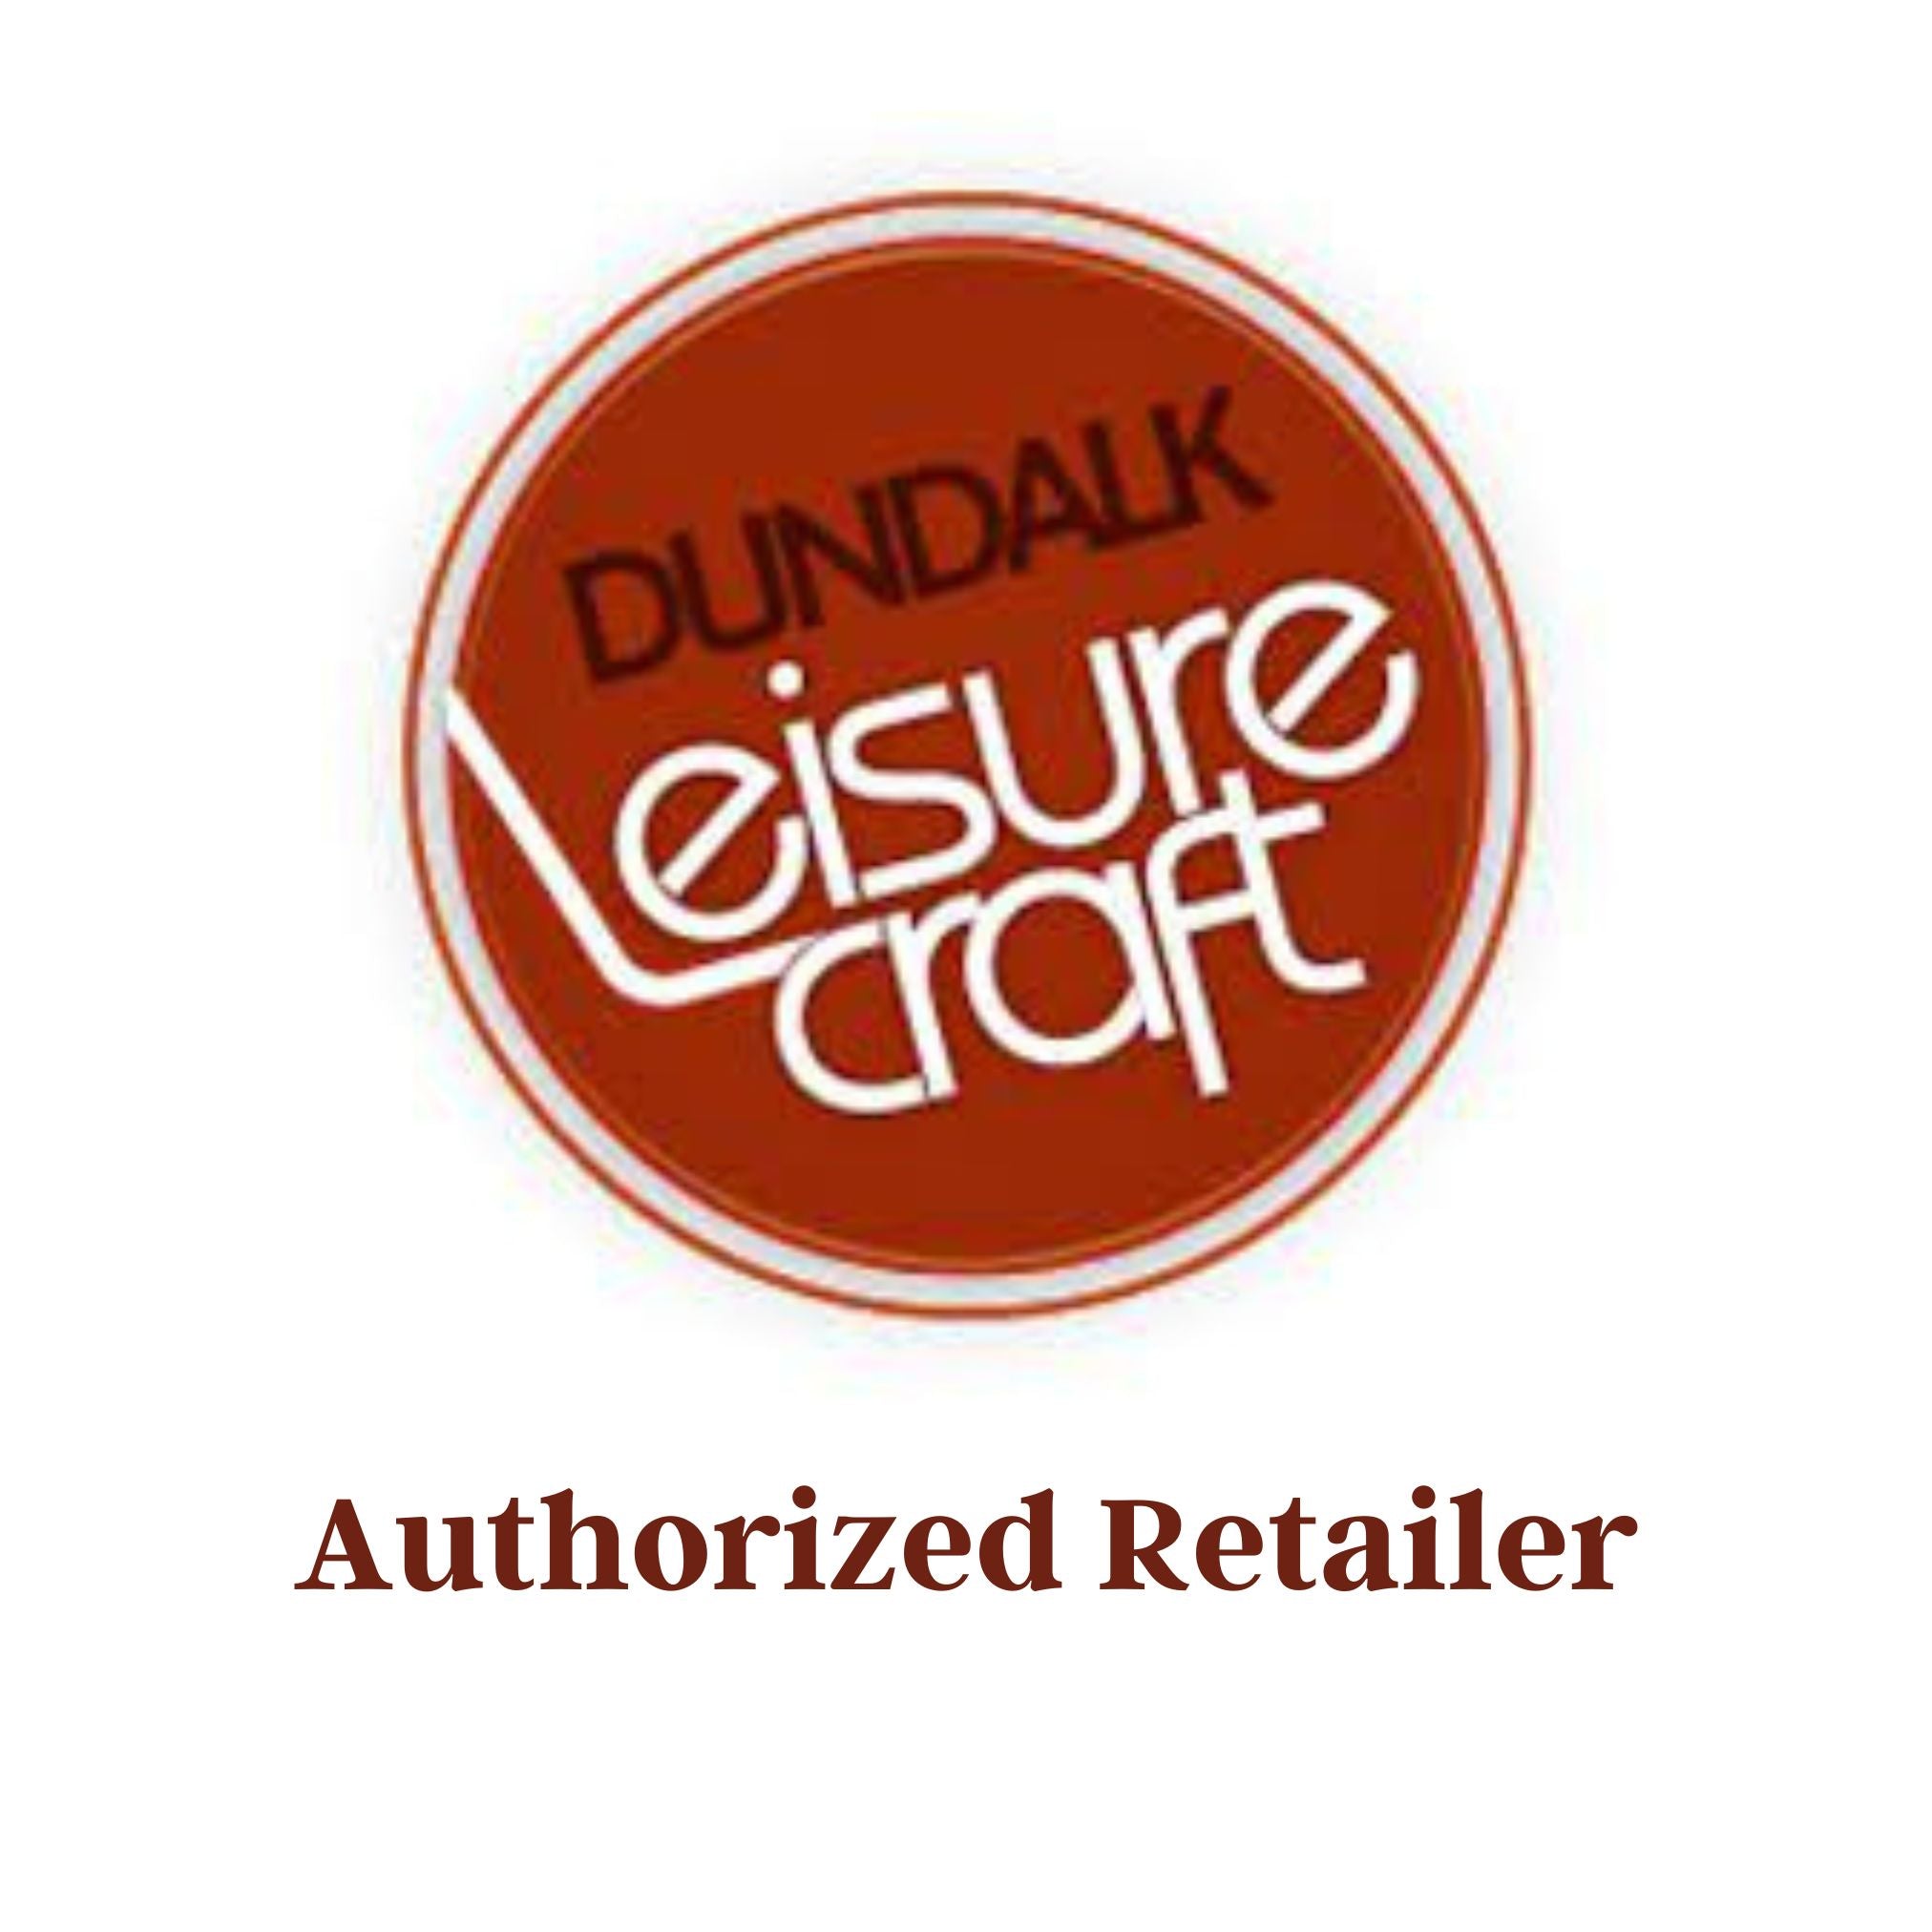 Dundalk LeisureCraft authorized retailer specializing in The Polar Plunge Tubs for cold plunge therapy.